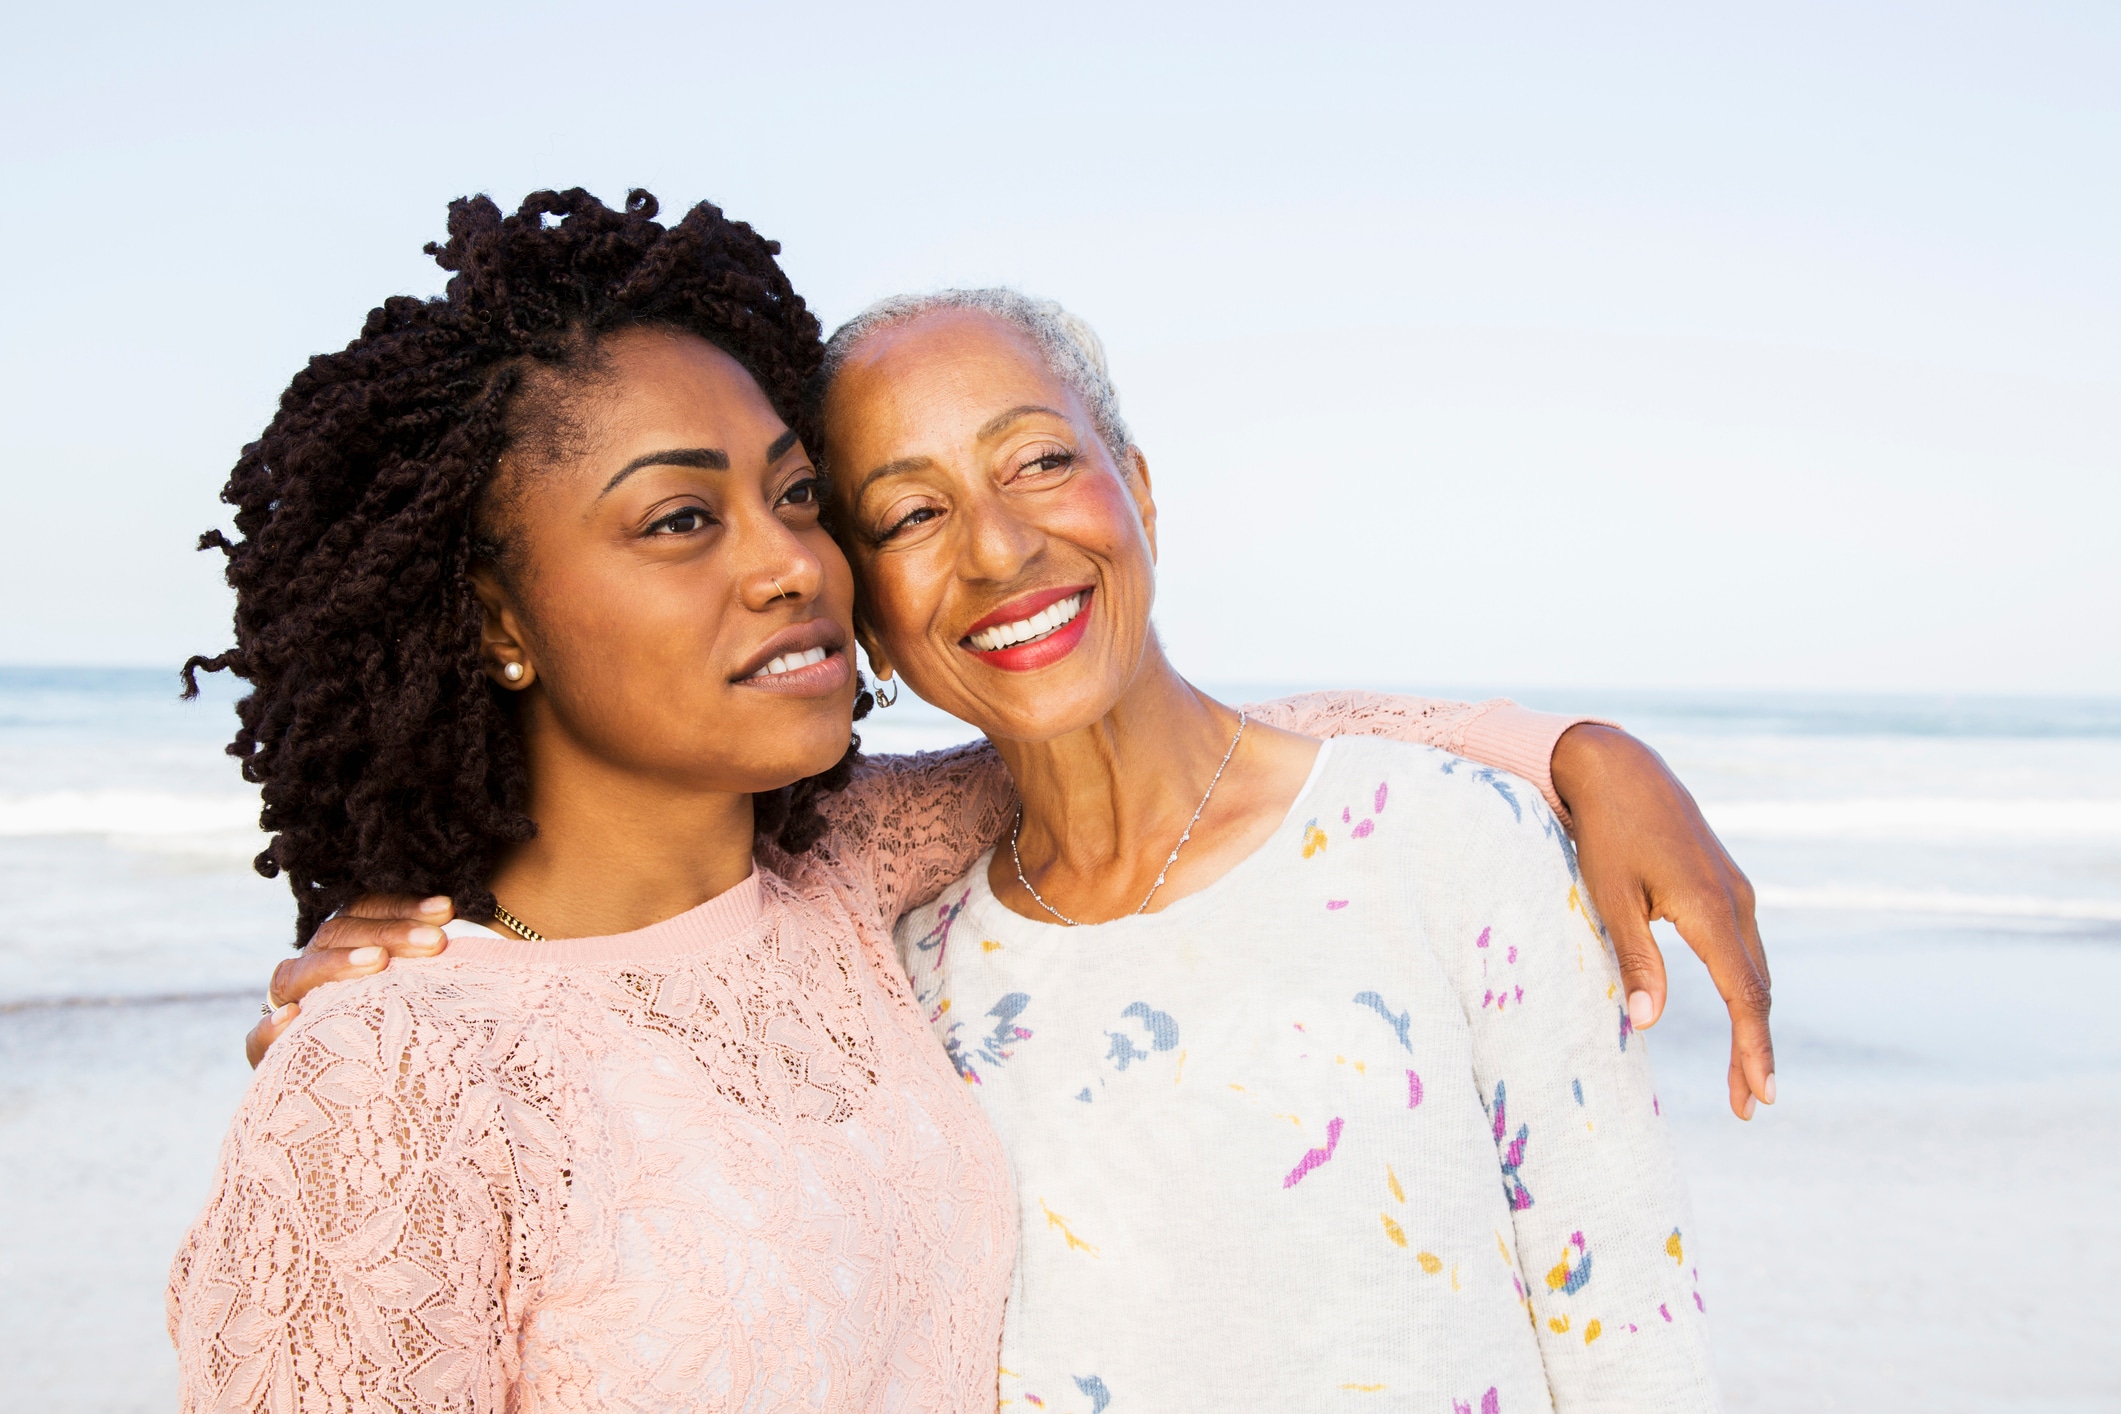 Caring for an aging parent? Try these 8 tips to smooth the transition from child to caregiver